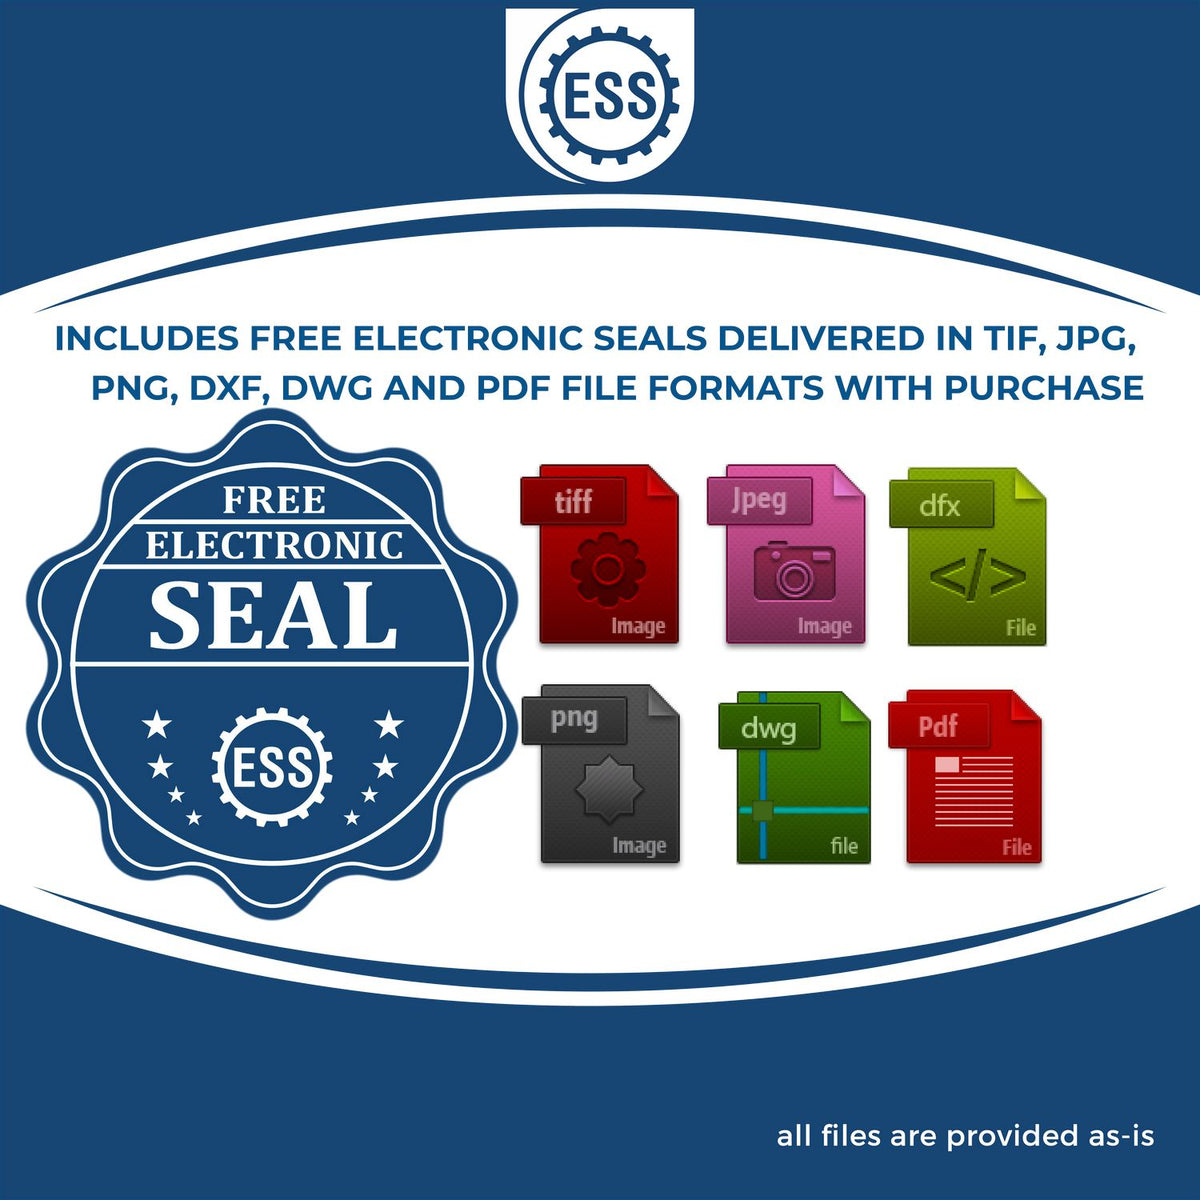 An infographic for the free electronic seal for the Georgia Engineer Desk Seal illustrating the different file type icons such as DXF, DWG, TIF, JPG and PNG.